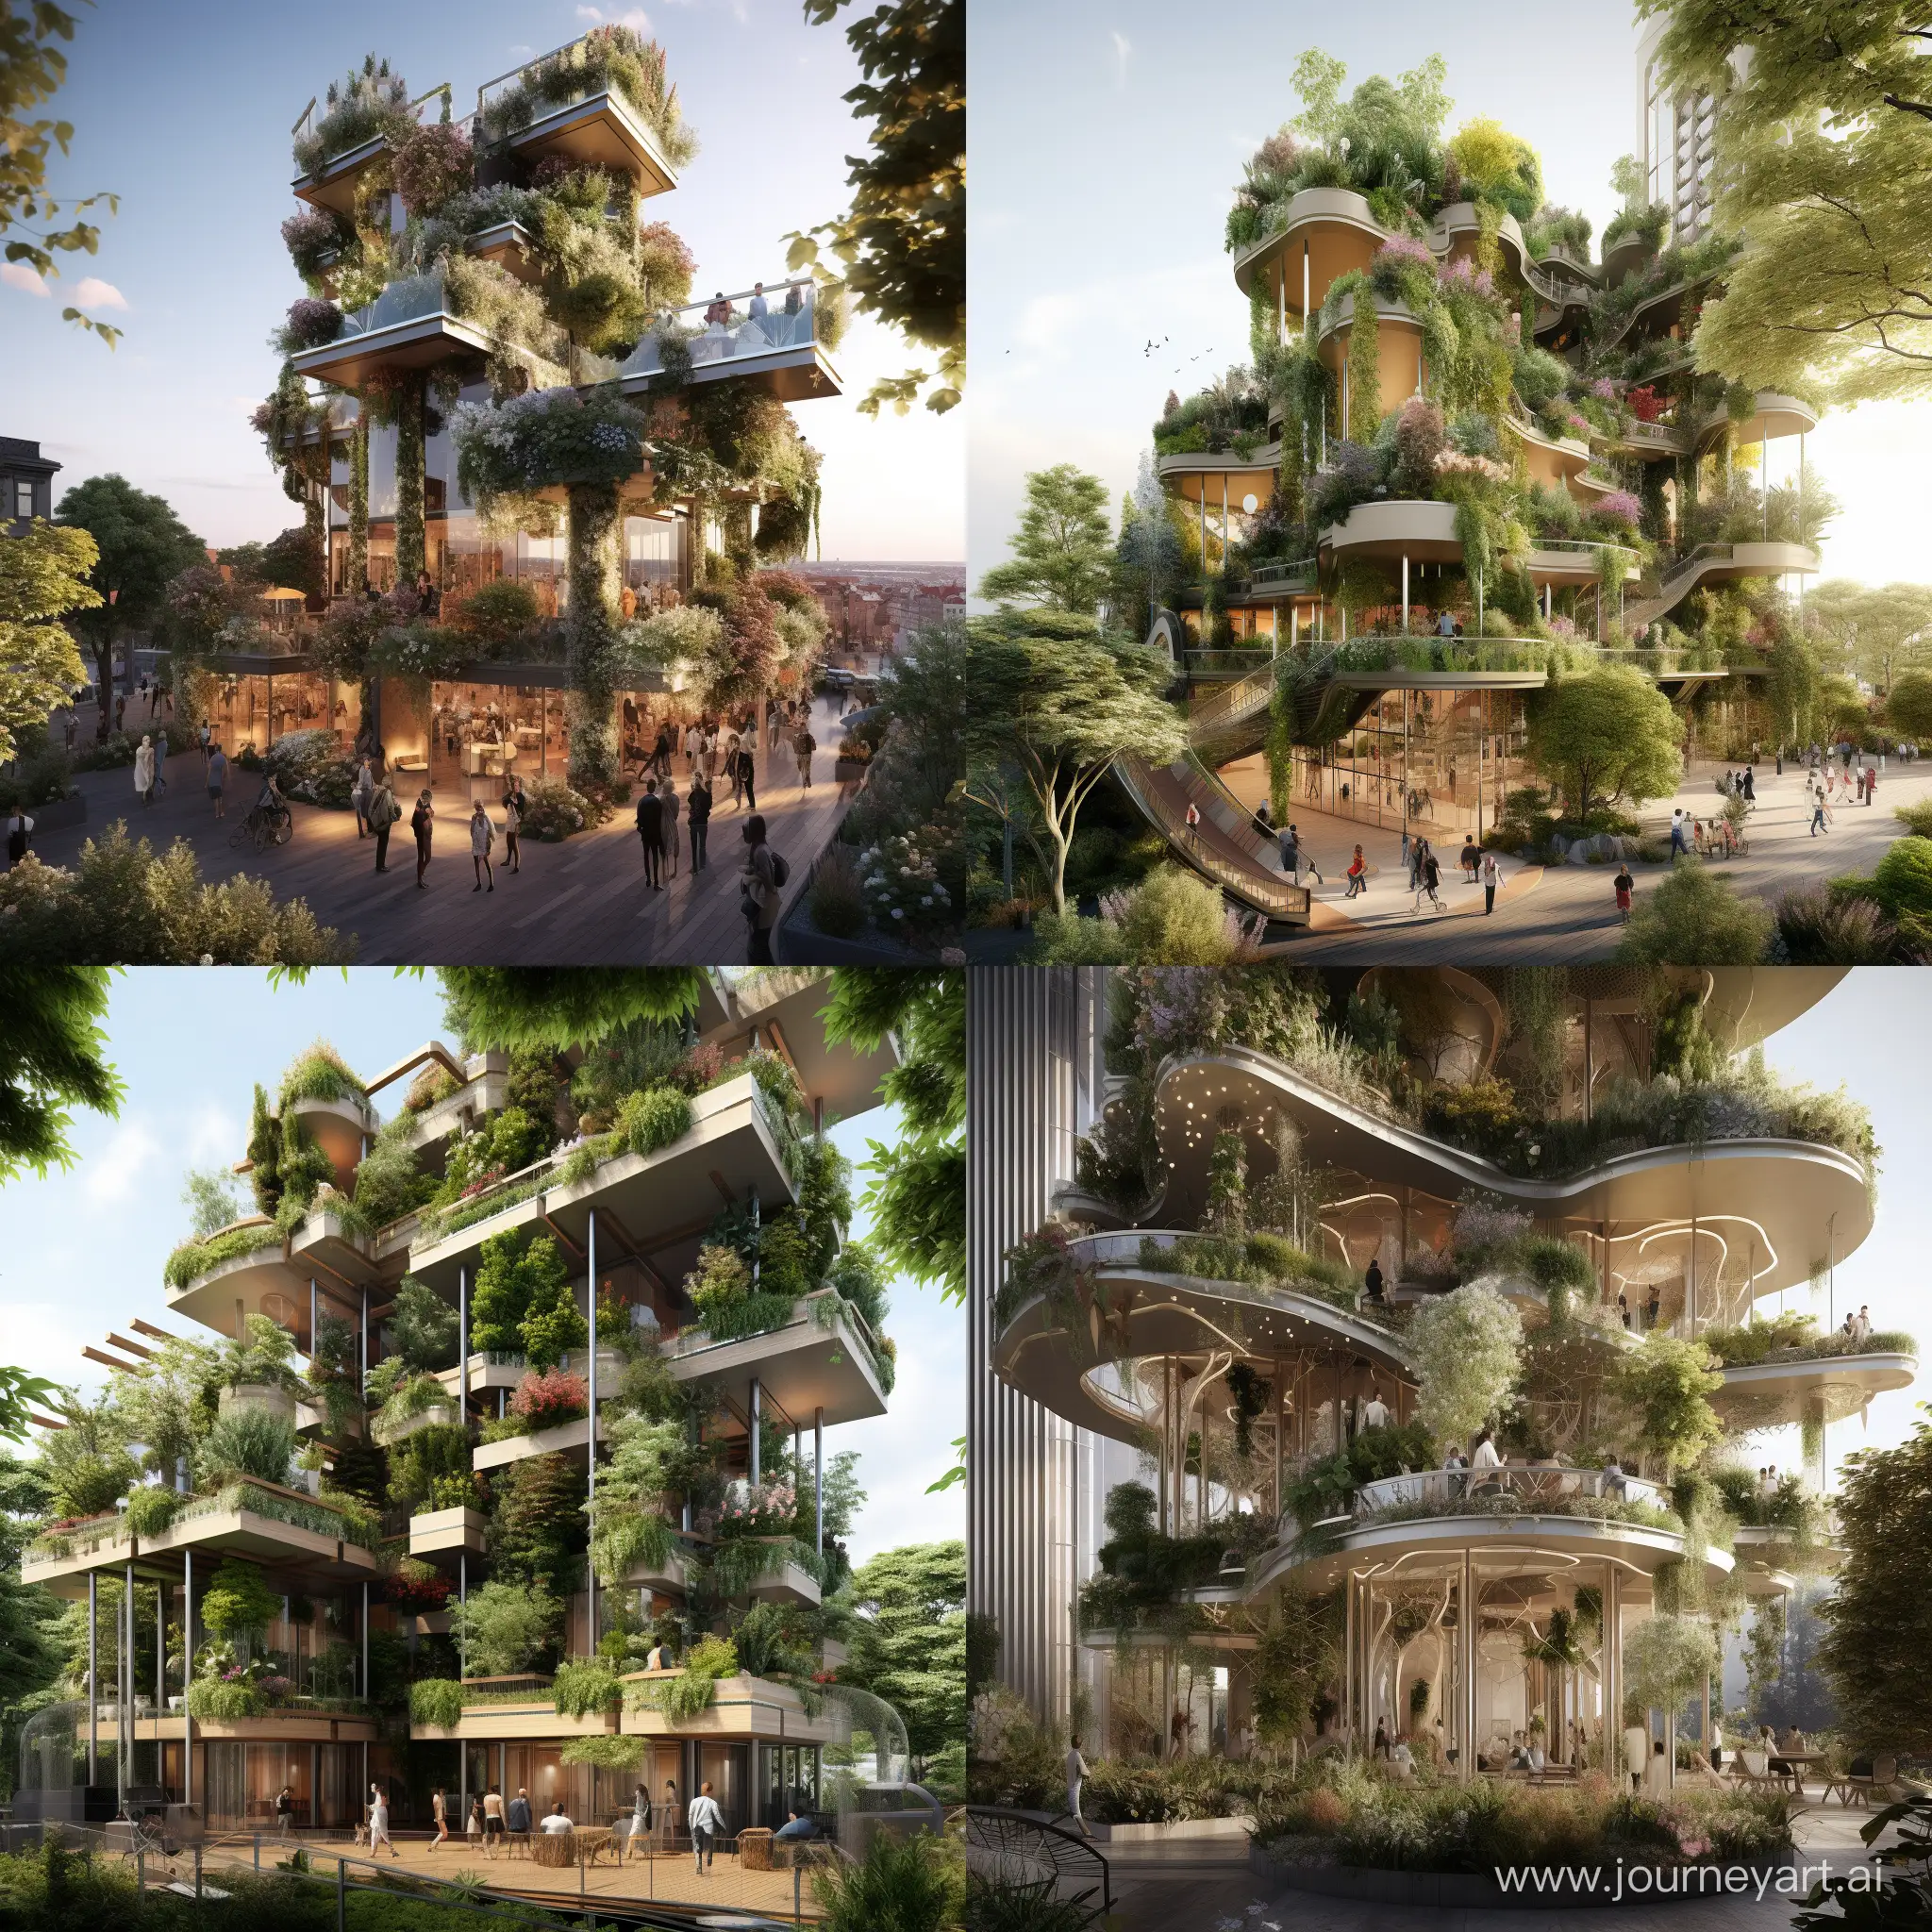 imagine Vertical Social Gardens: Design modern buildings that incorporate vertical gardens and communal spaces, encouraging social interaction and a connection with nature within an urban setting in future cities